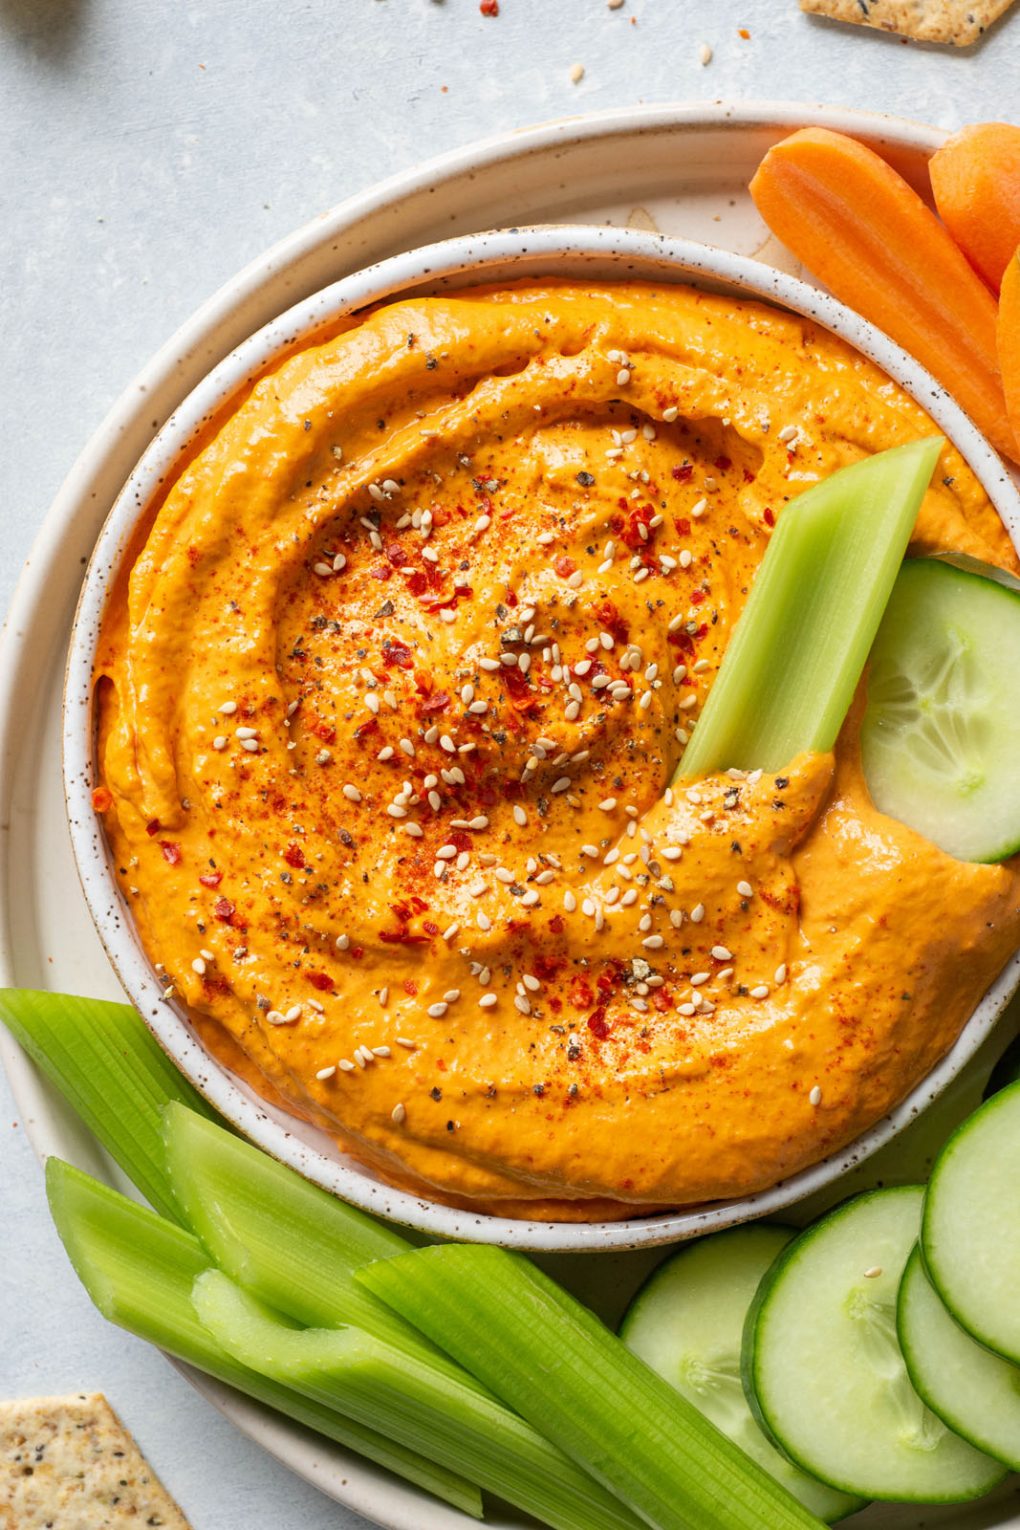 Overhead shot of a small speckled white bowl filled with bright orange roasted red pepper tahini dip. Dip is garnished with sesame seeds and chili flakes. On a plate with carrots, sliced cucumber, and celery sticks.